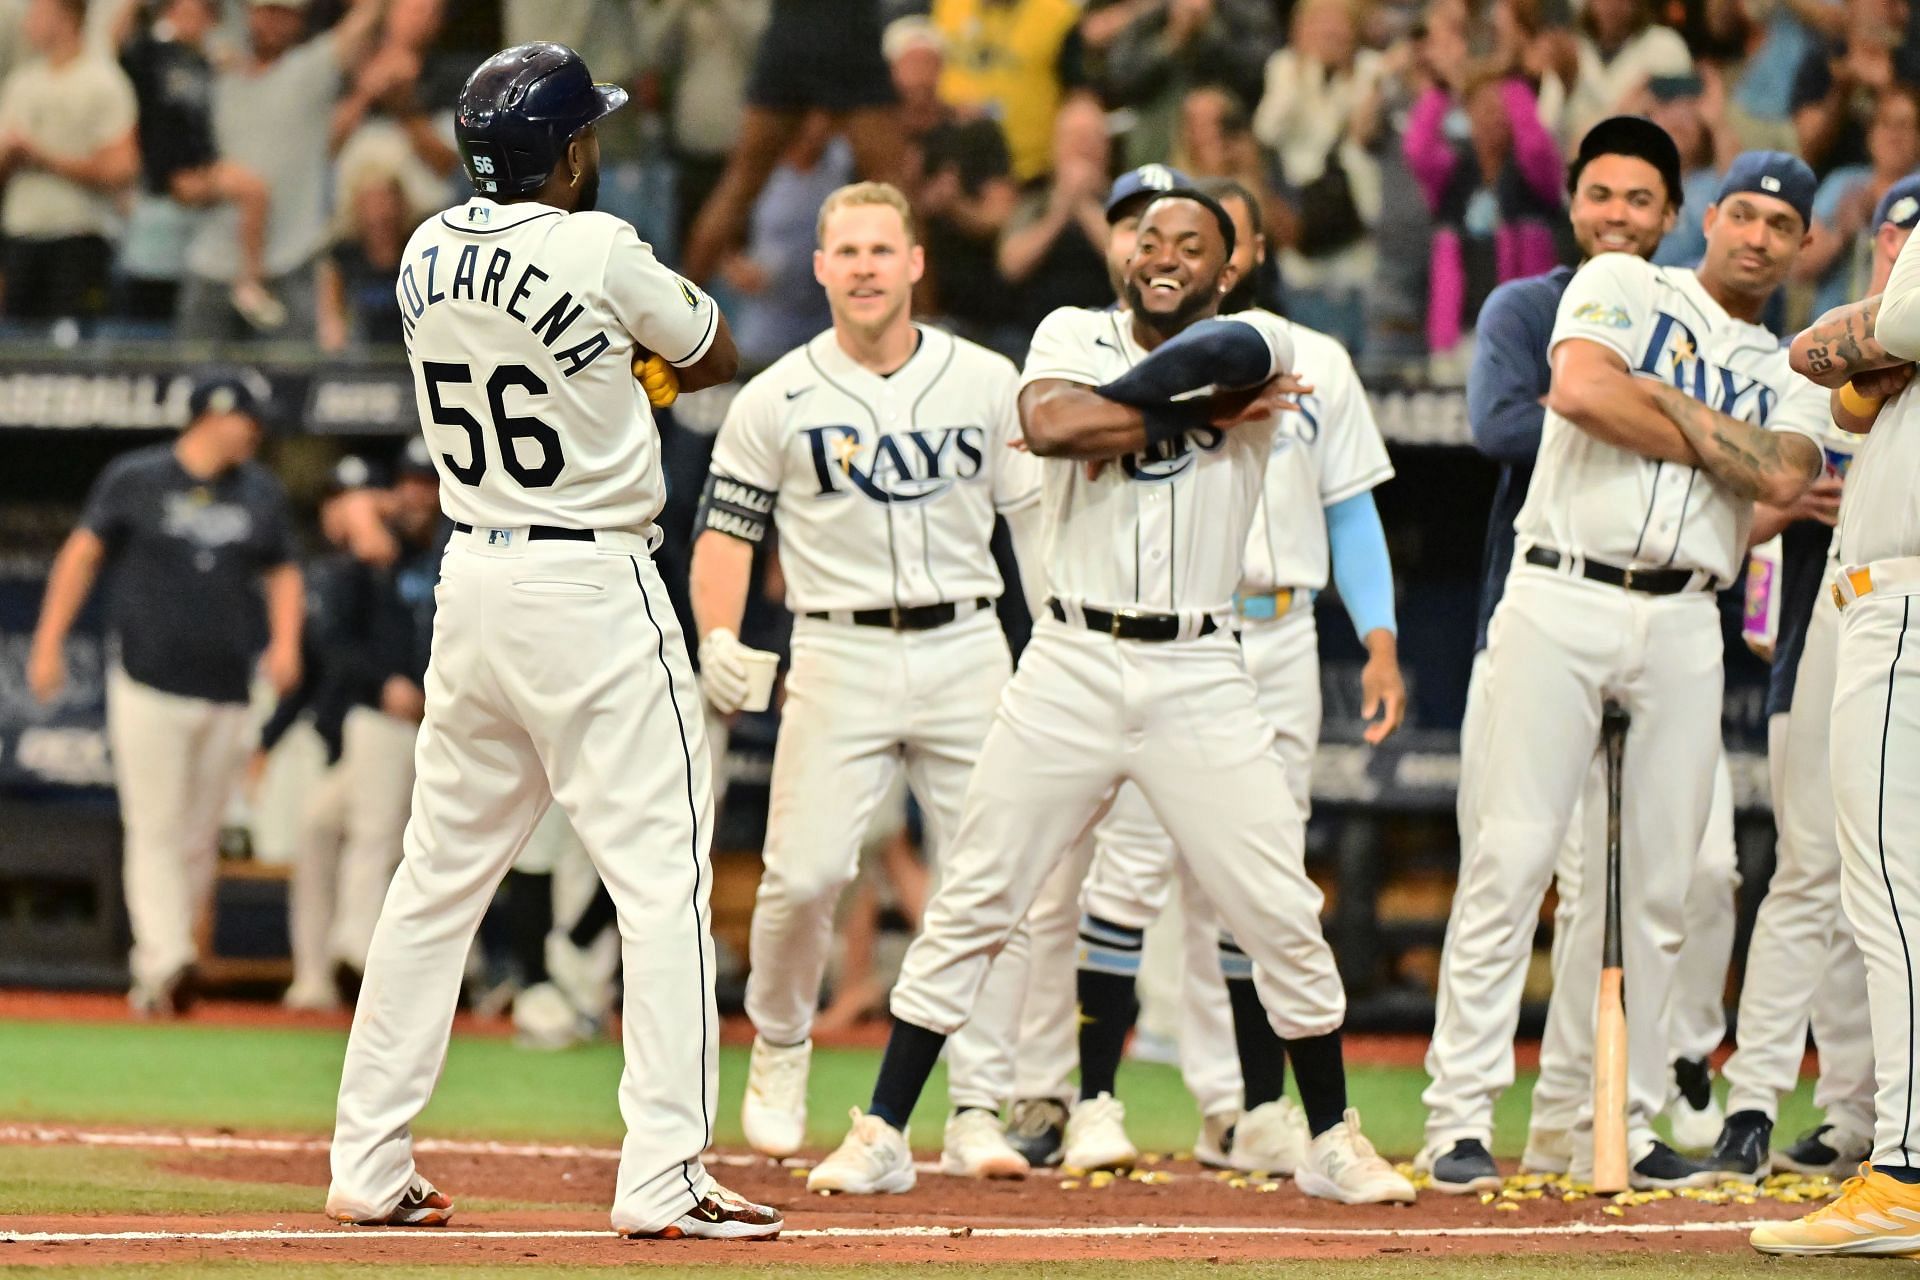 Randy Arozarena of the Tampa Bay Rays poses after hitting a home run at Tropicana Field